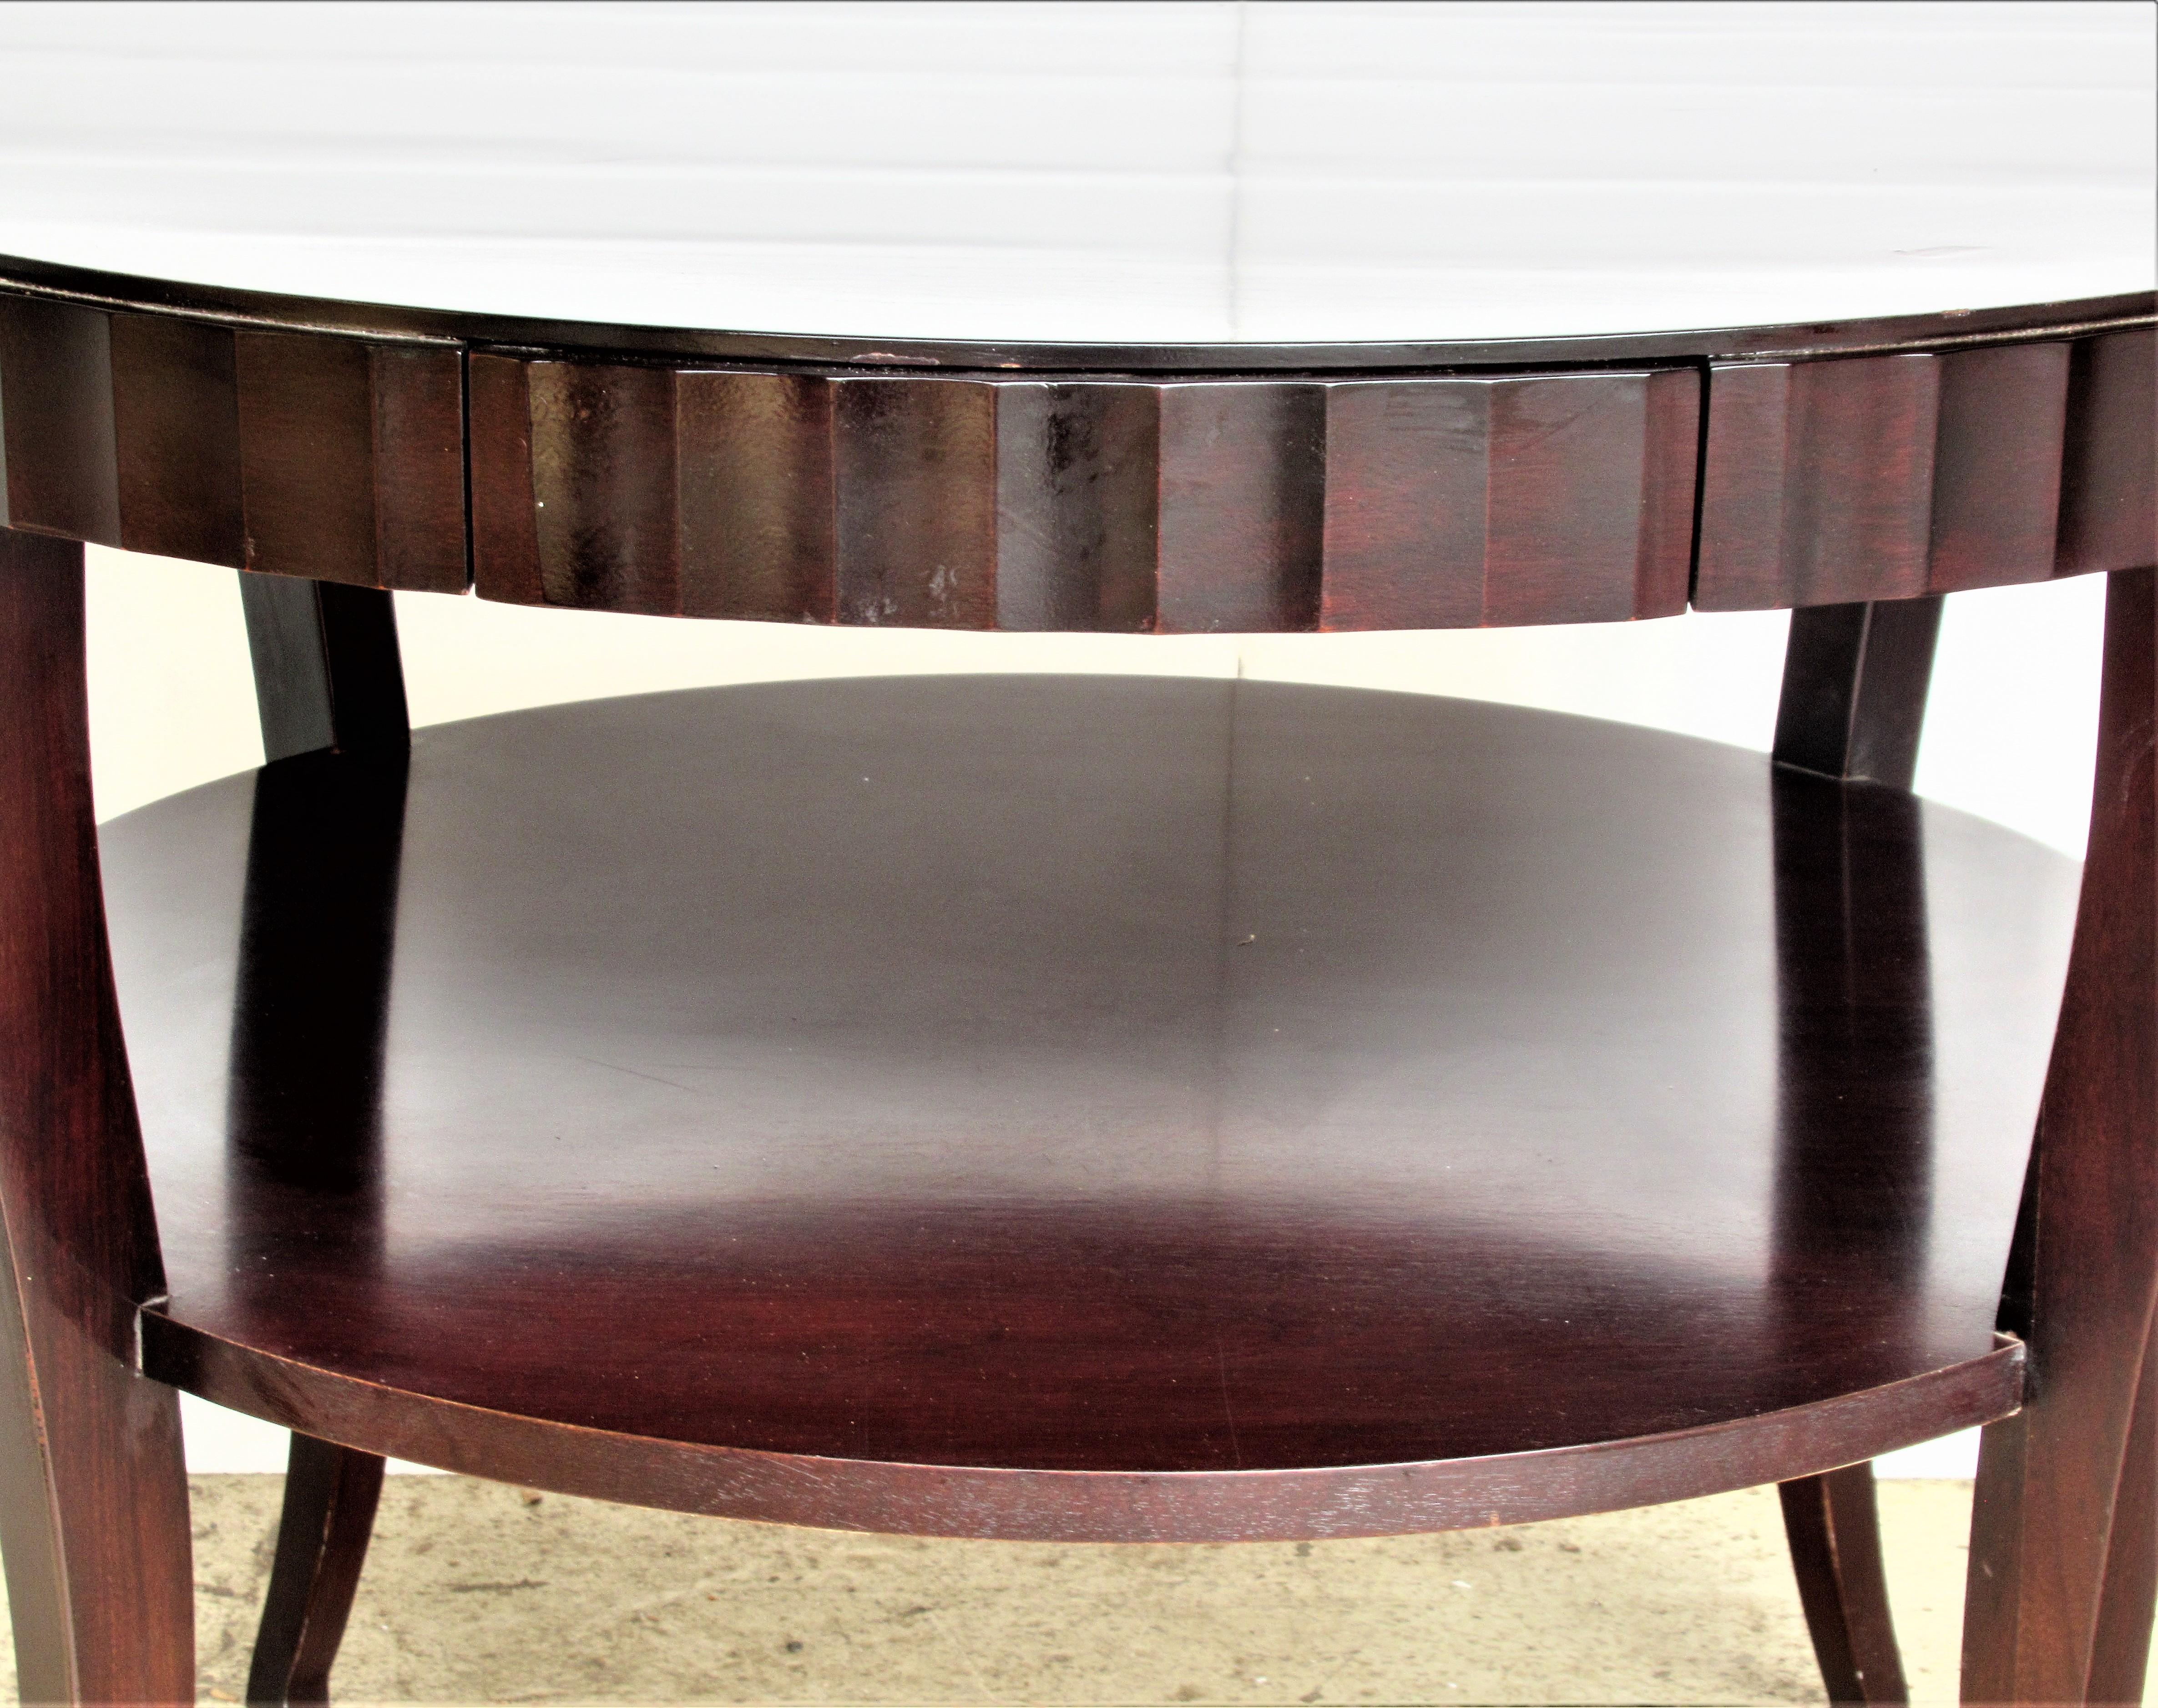 Late 20th Century Art Deco Style Center Table by Barbara Barry for Baker Furniture